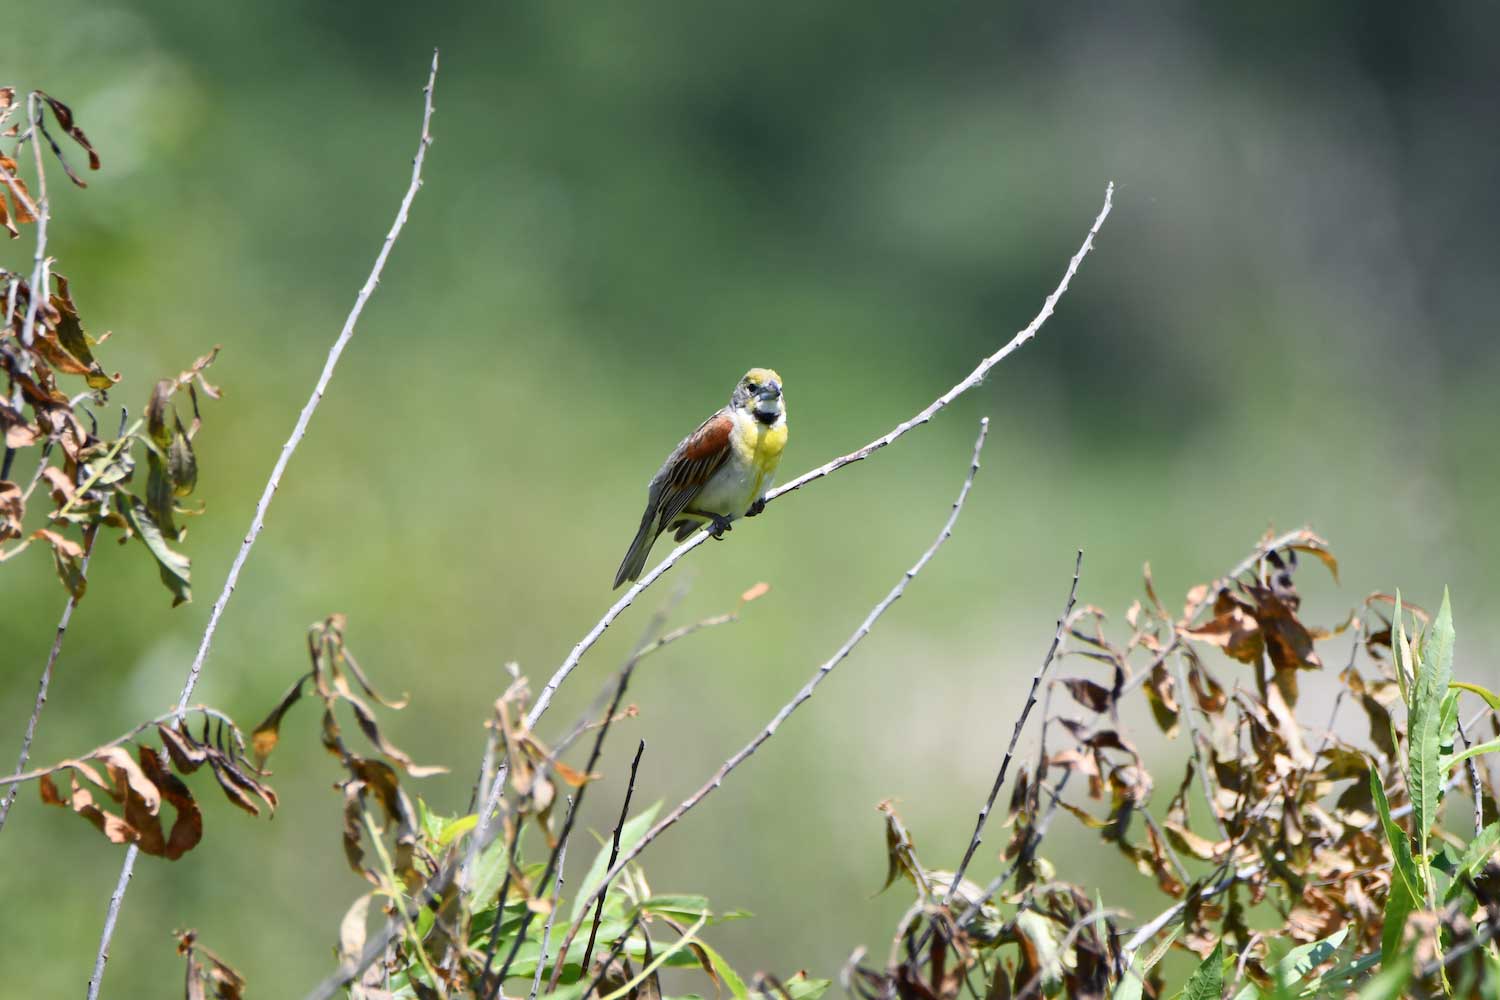 A dickcissel perched on vegetation.